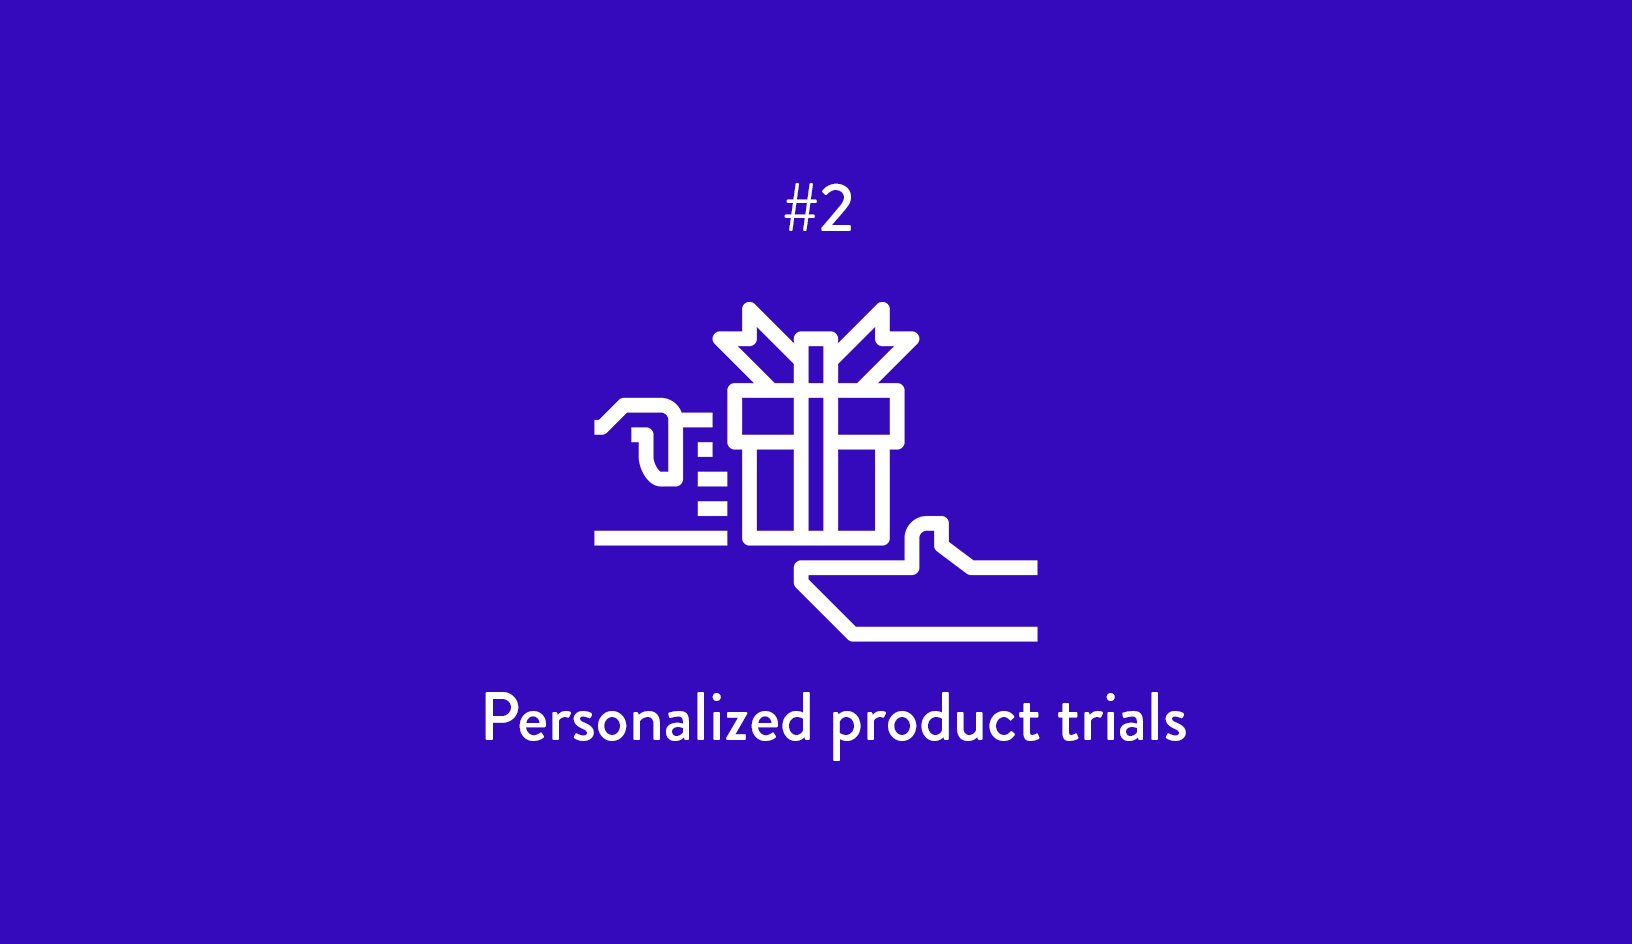 In order to gather leads at tradeshow, while respecting privacy laws, think about mailing personalized product samples or offering free trials or in order to gather emails and leads.